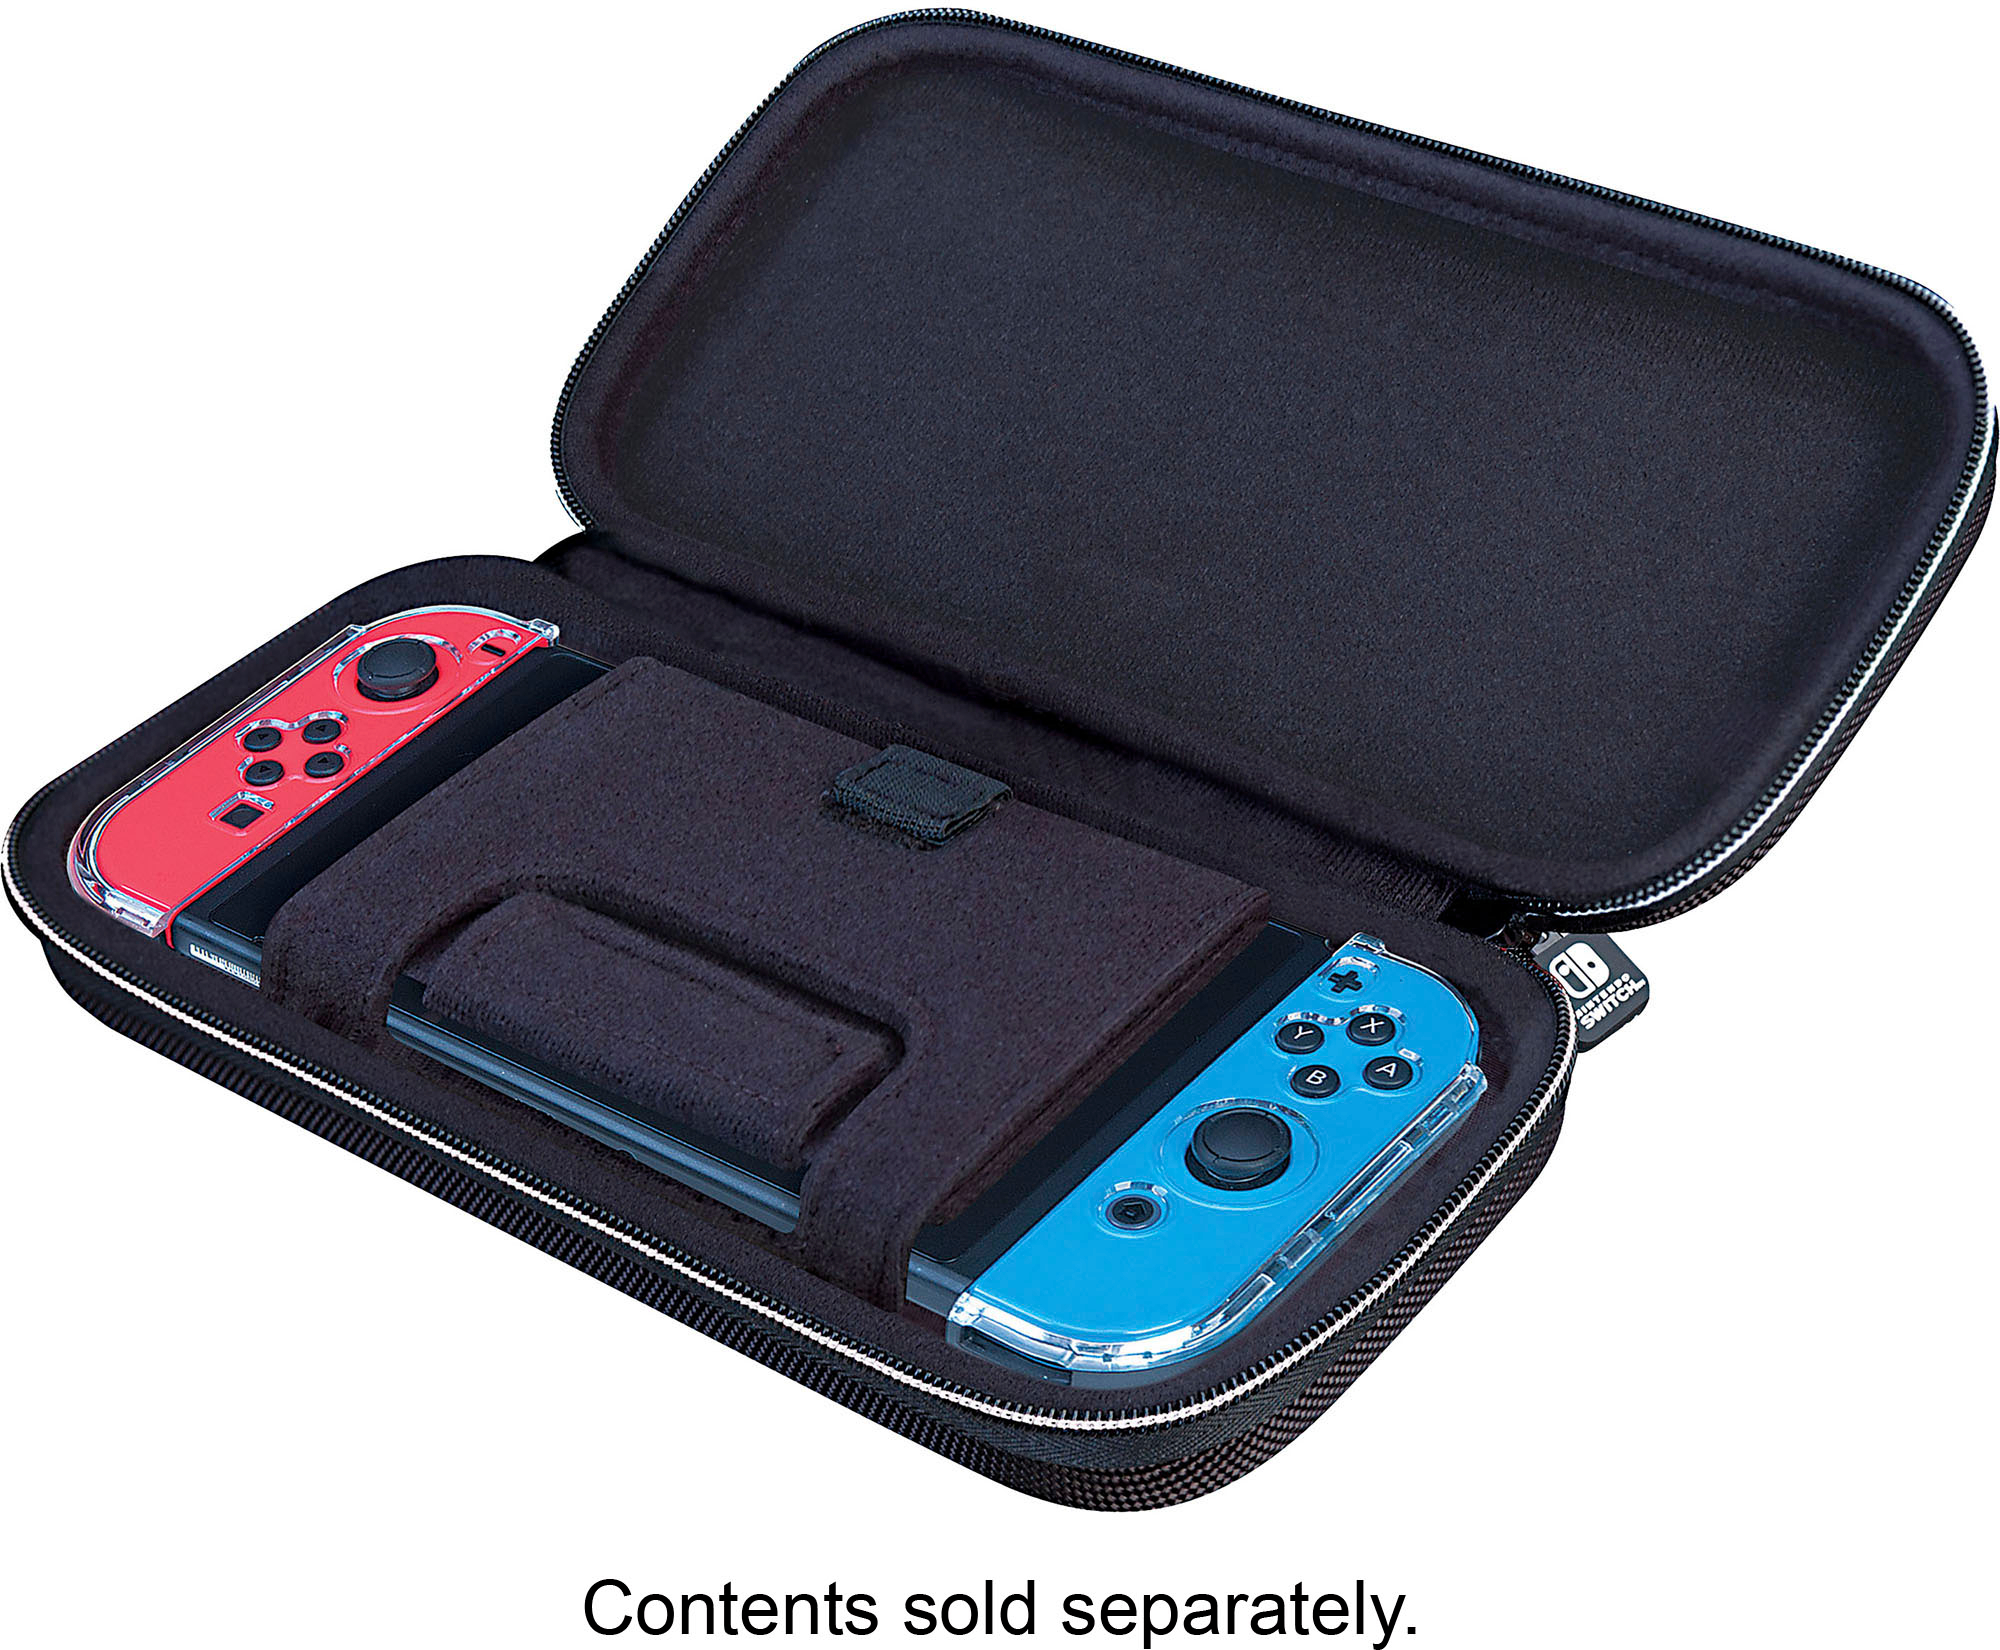 Nintendo Switch OLED Case, 16 in 1 Nintendo Switch OLED Case Bundle,  Includes Switch OLED Carrying Case, Screen Protector, Adjustable Stand &  More-Pink 